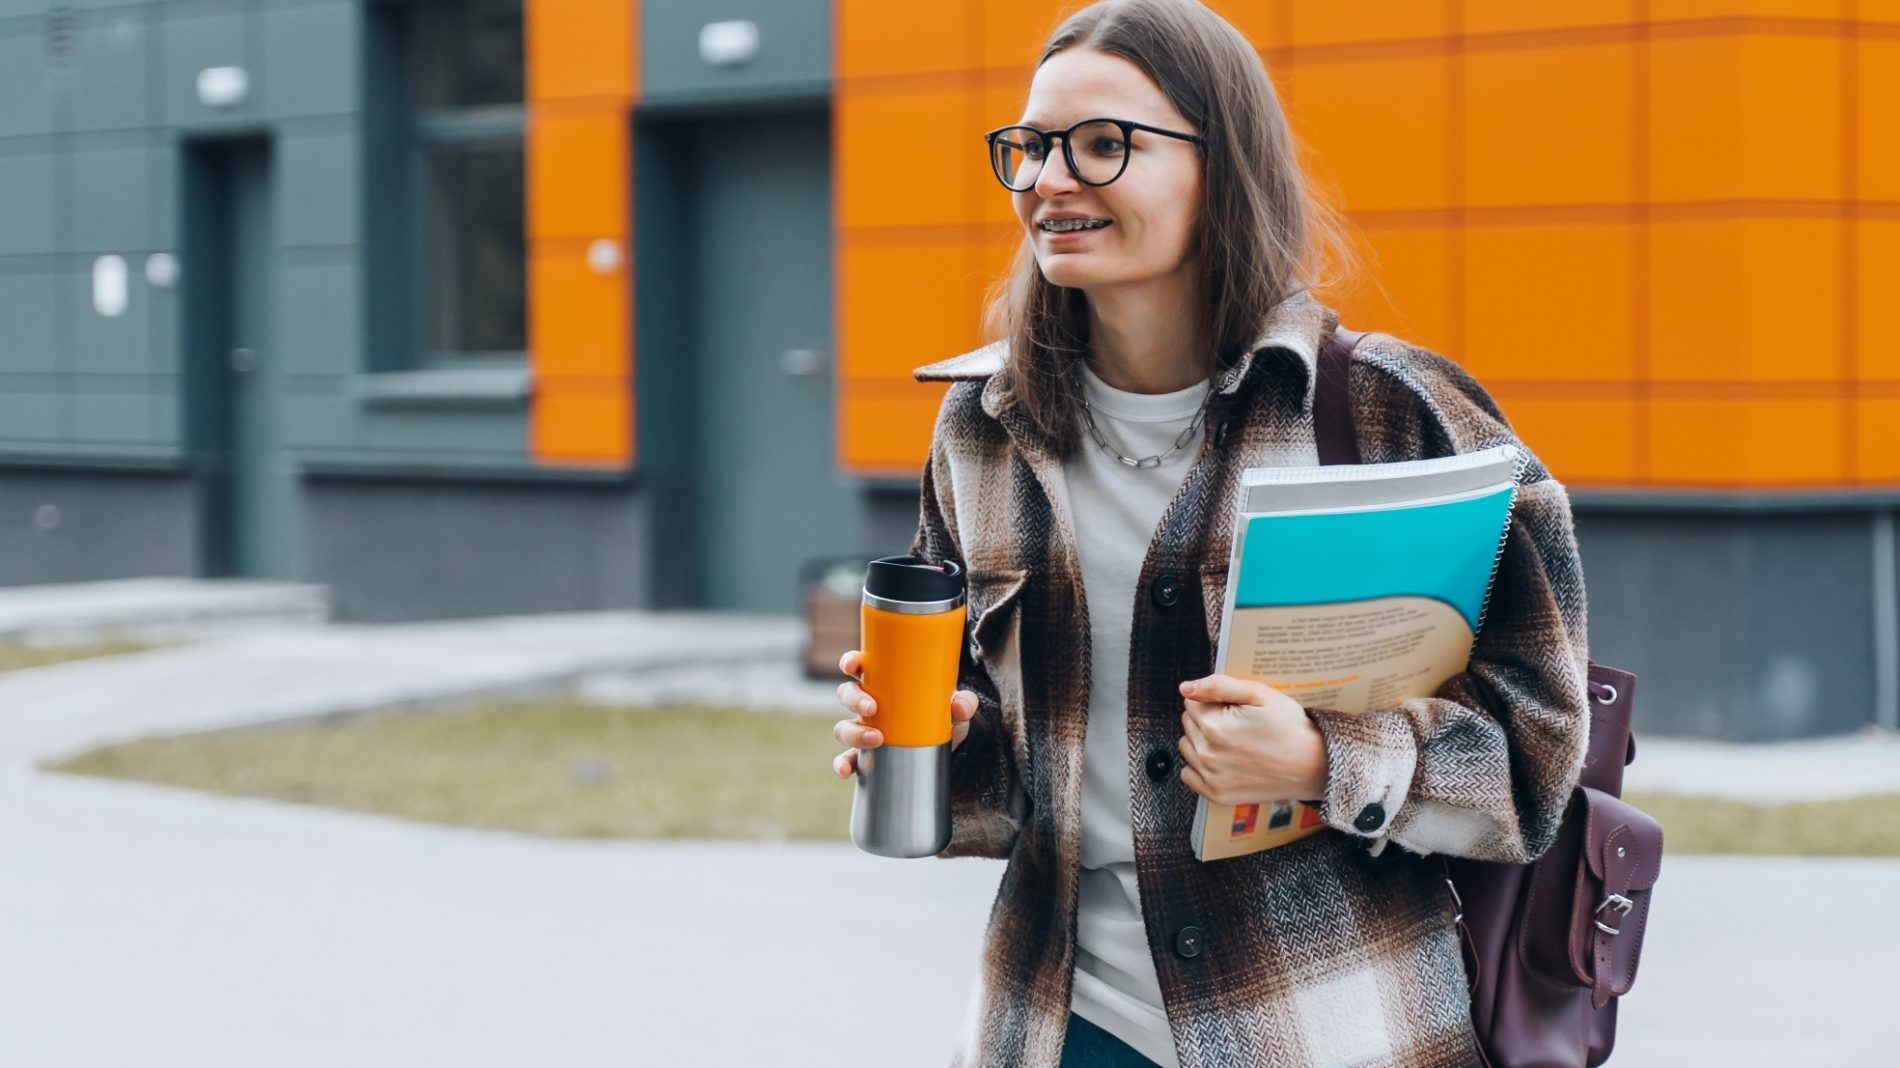 Student walking on a campus with coffee and books - going to college with an invisible disability